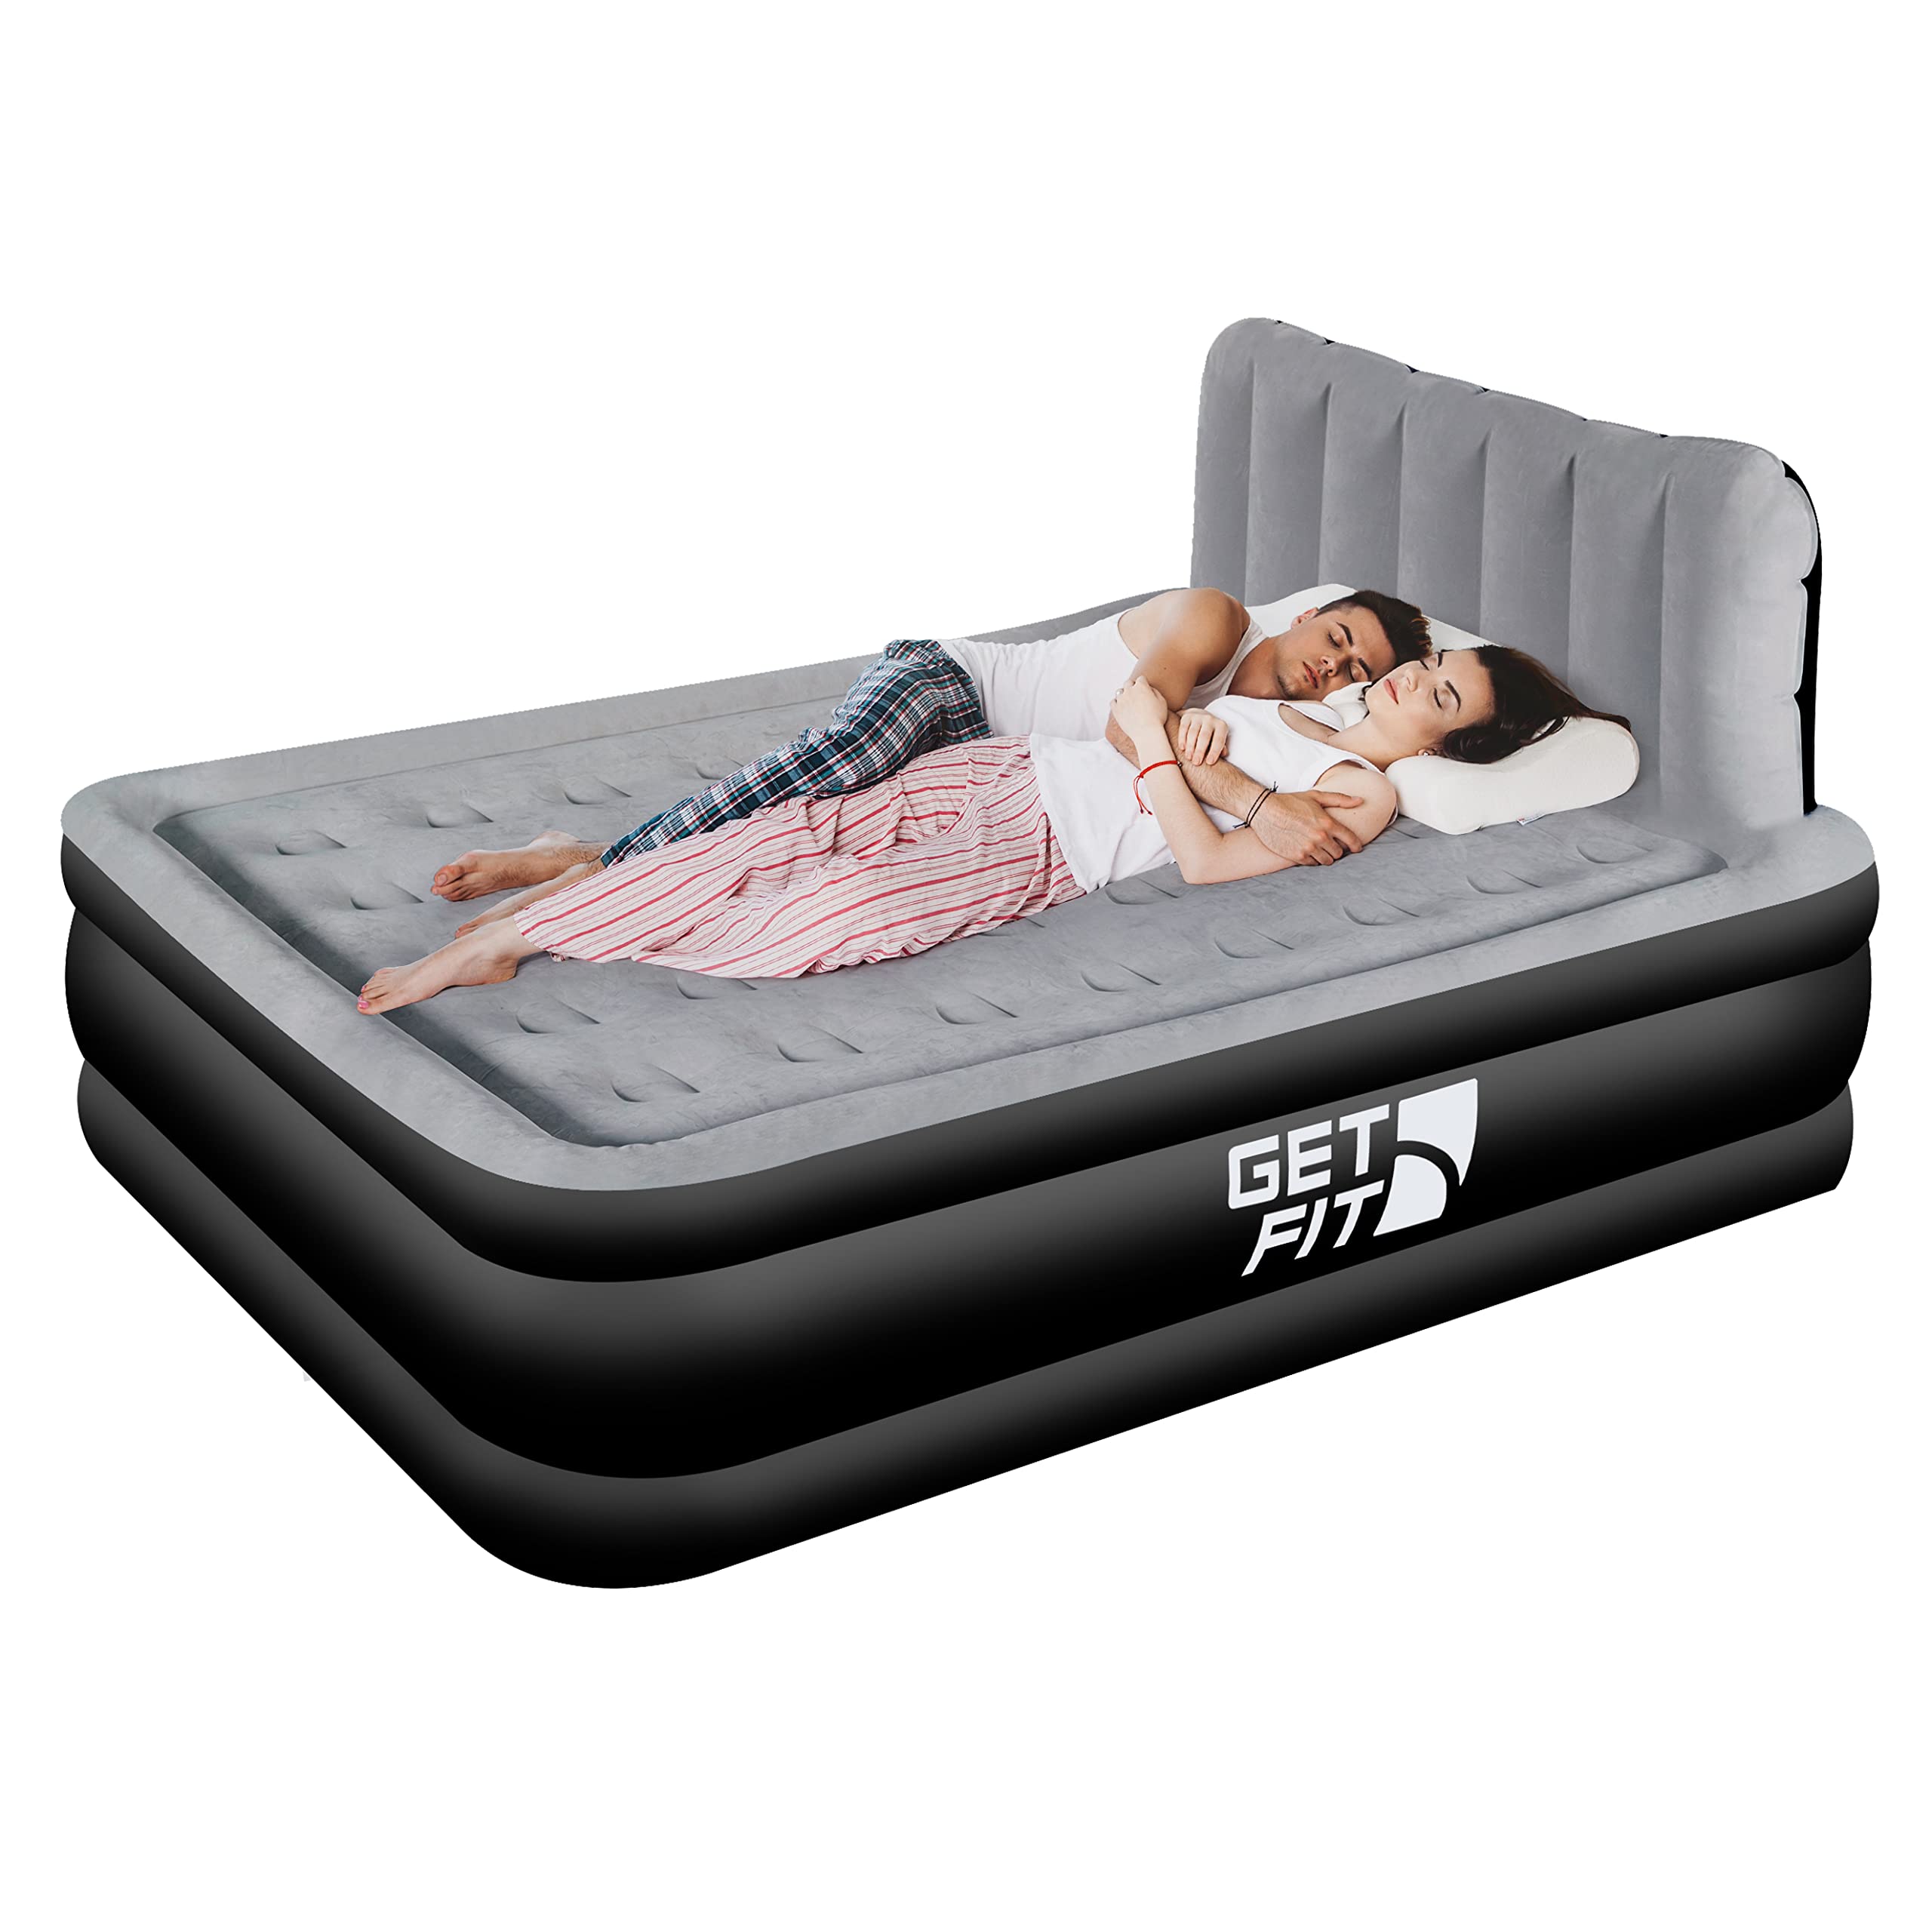 Get Fit Air Bed With Built In Electric Pump - Premium King Airbed - Quick Blow Up Bed With Headboard, 2 Free Inflatable Pillows - Elevated Inflatable Air Mattress For Outdoor, Camping - Black/Grey